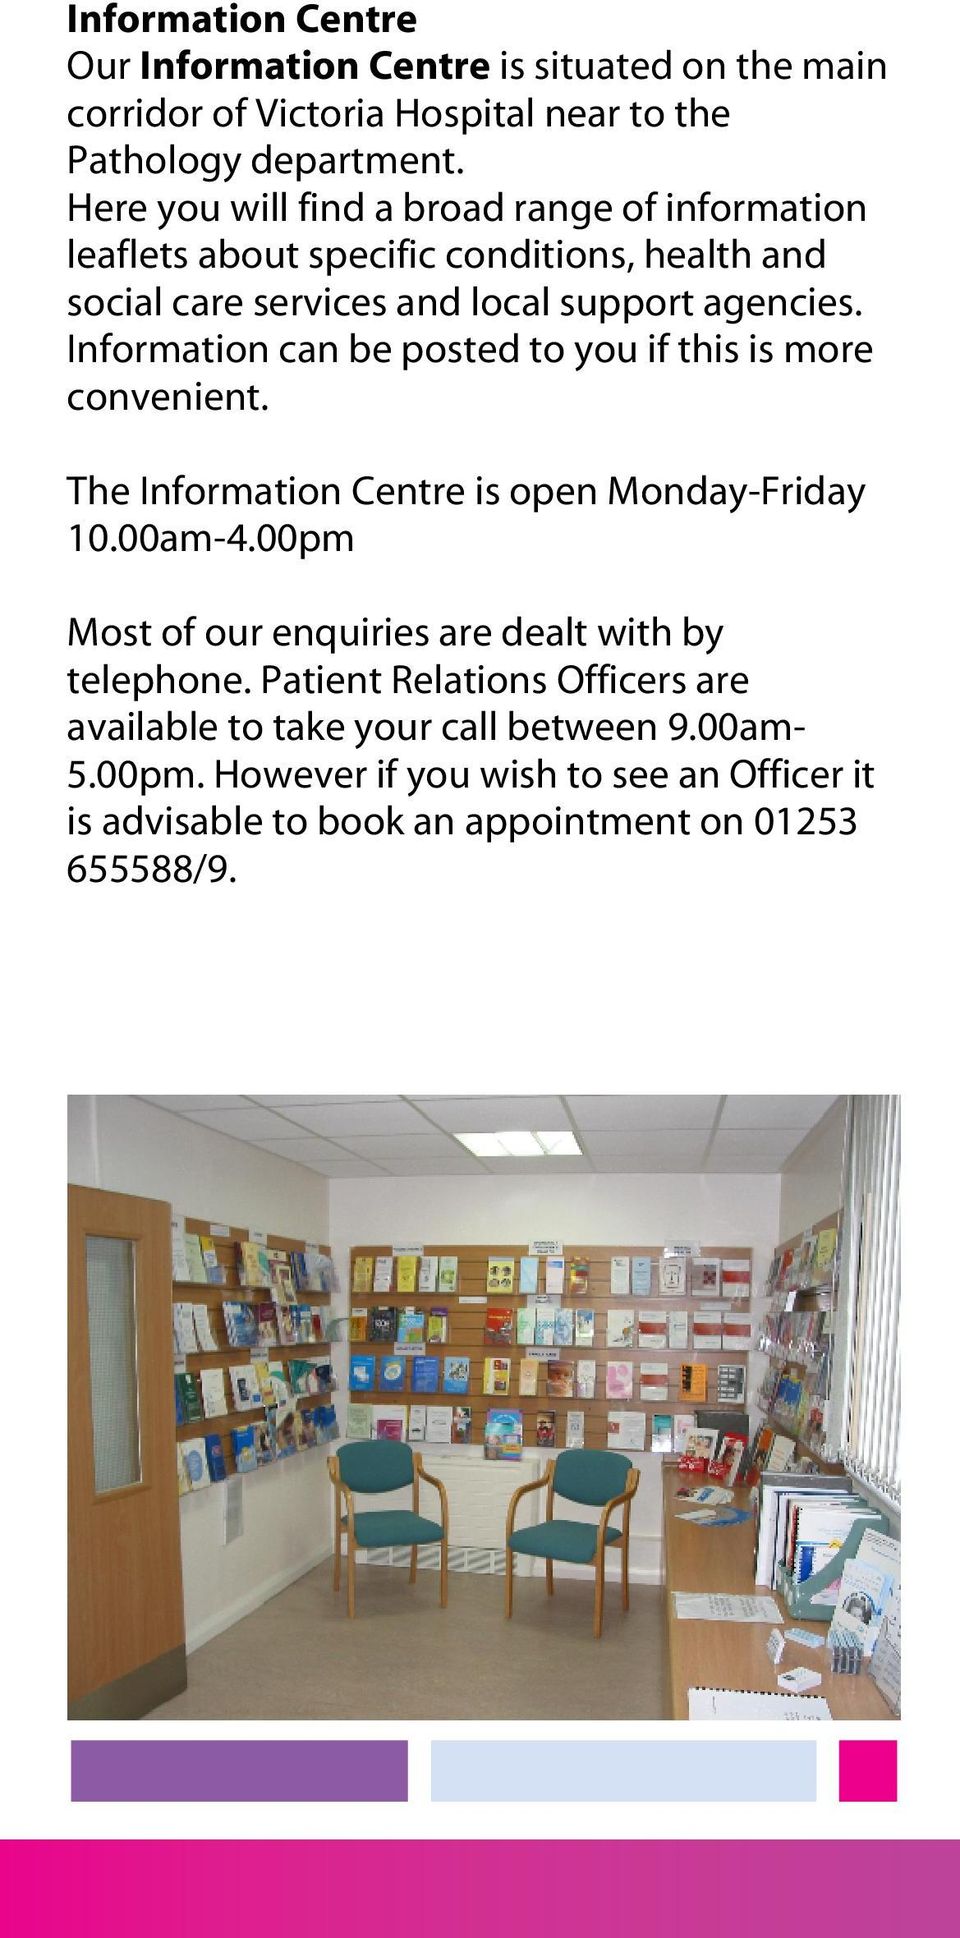 Information can be posted to you if this is more convenient. The Information Centre is open Monday-Friday 10.00am-4.